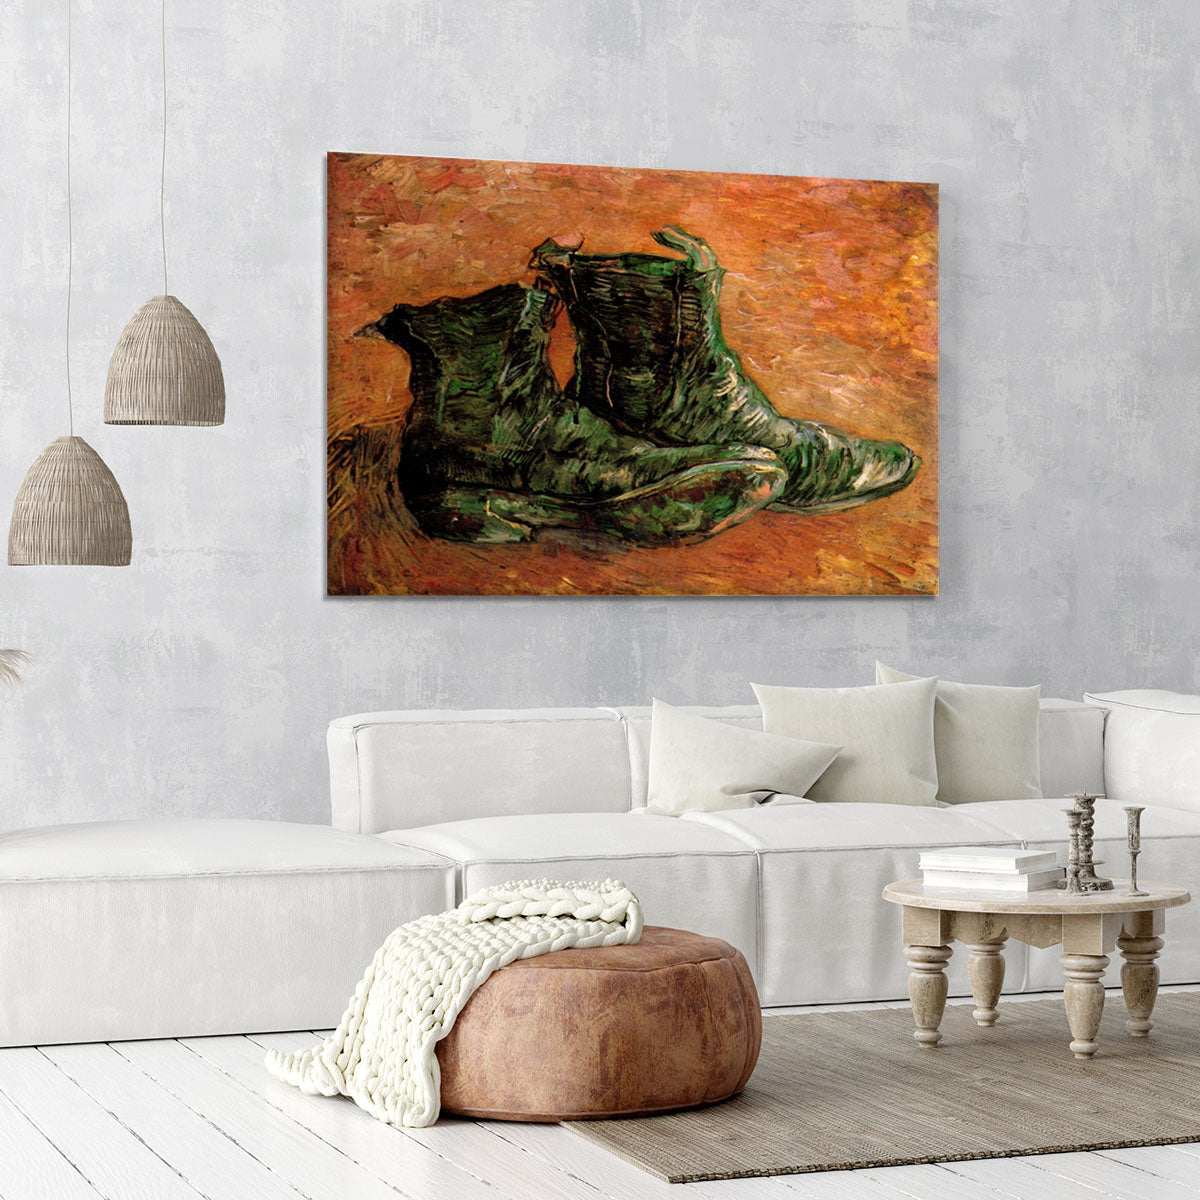 A Pair of Shoes by Van Gogh Canvas Print or Poster - Canvas Art Rocks - 6